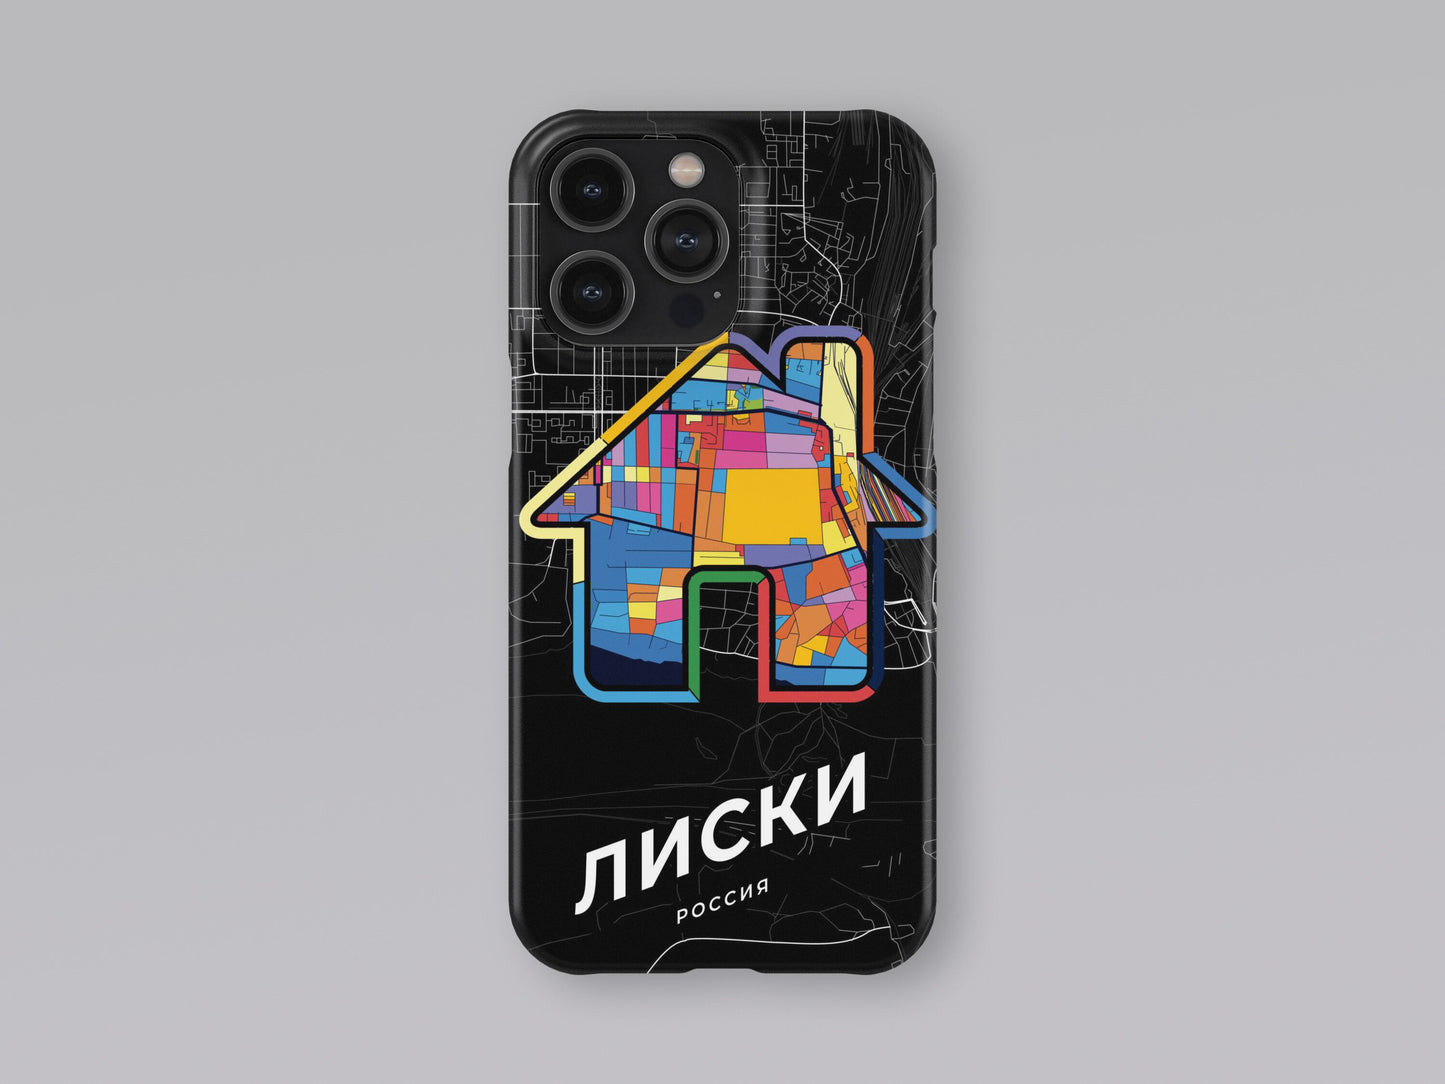 Liski Russia slim phone case with colorful icon. Birthday, wedding or housewarming gift. Couple match cases. 3